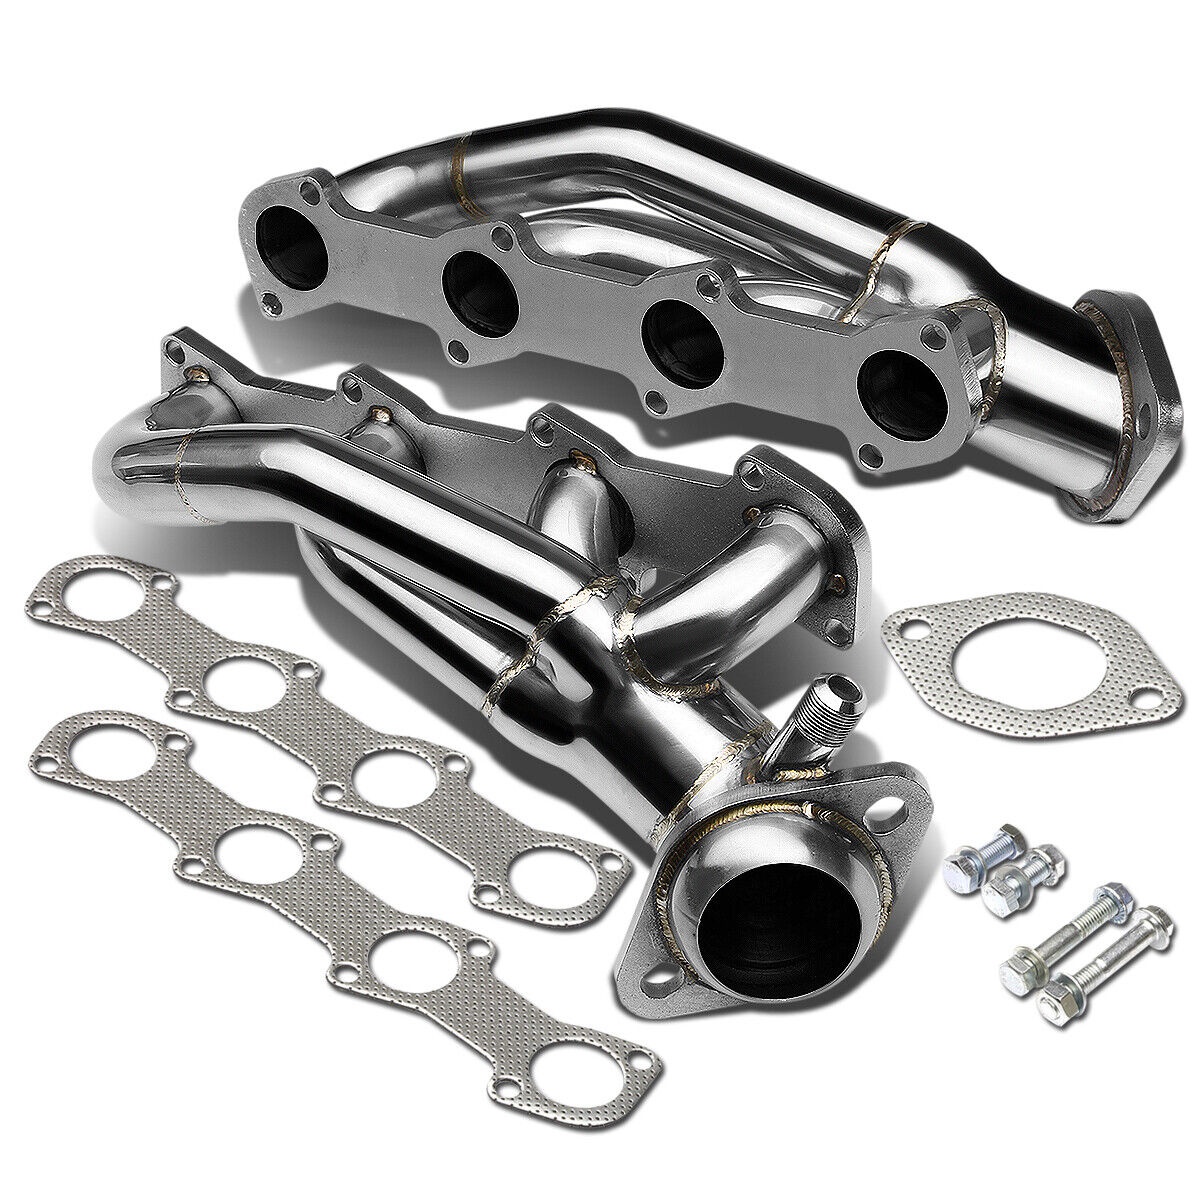 FOR 96-04 MUSTANG GT 4.6 SOHC V8 STAINLESS T304 SHORTY EXHAUST HEADER/MANIFOLD